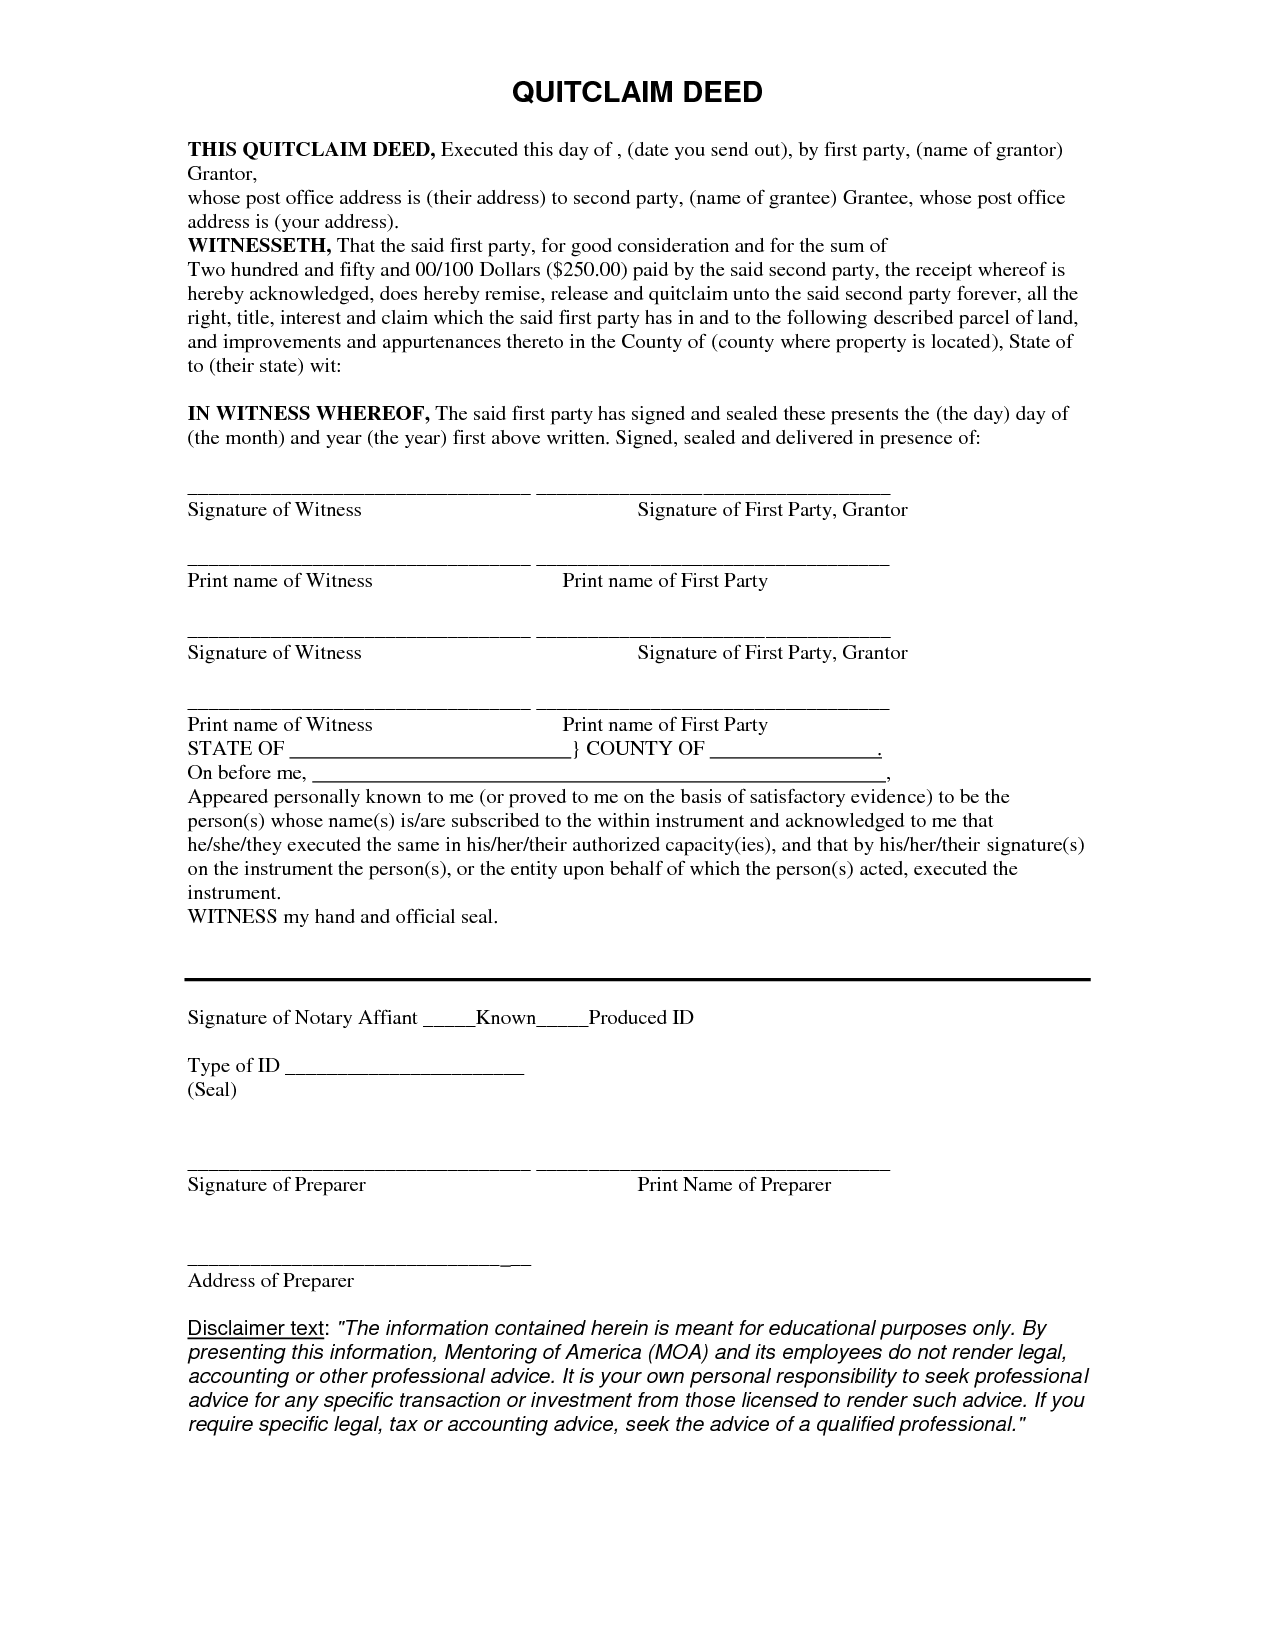 sample-quit-claim-deed-form-free-printable-documents